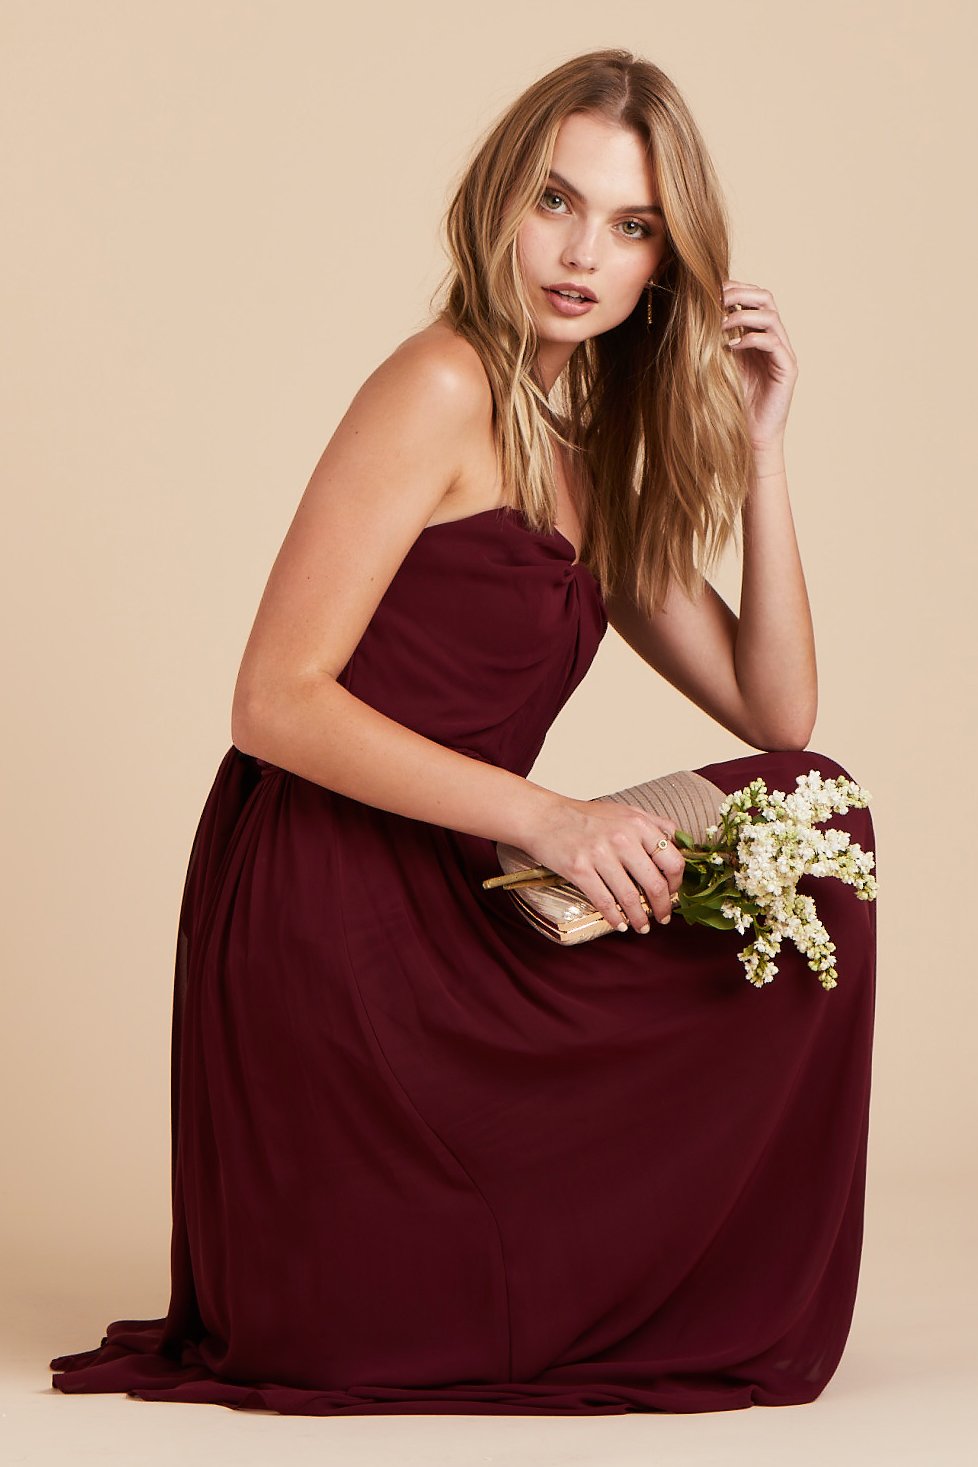 Chicky convertible bridesmaid dress in cabernet burgundy mesh by Birdy Grey, front view